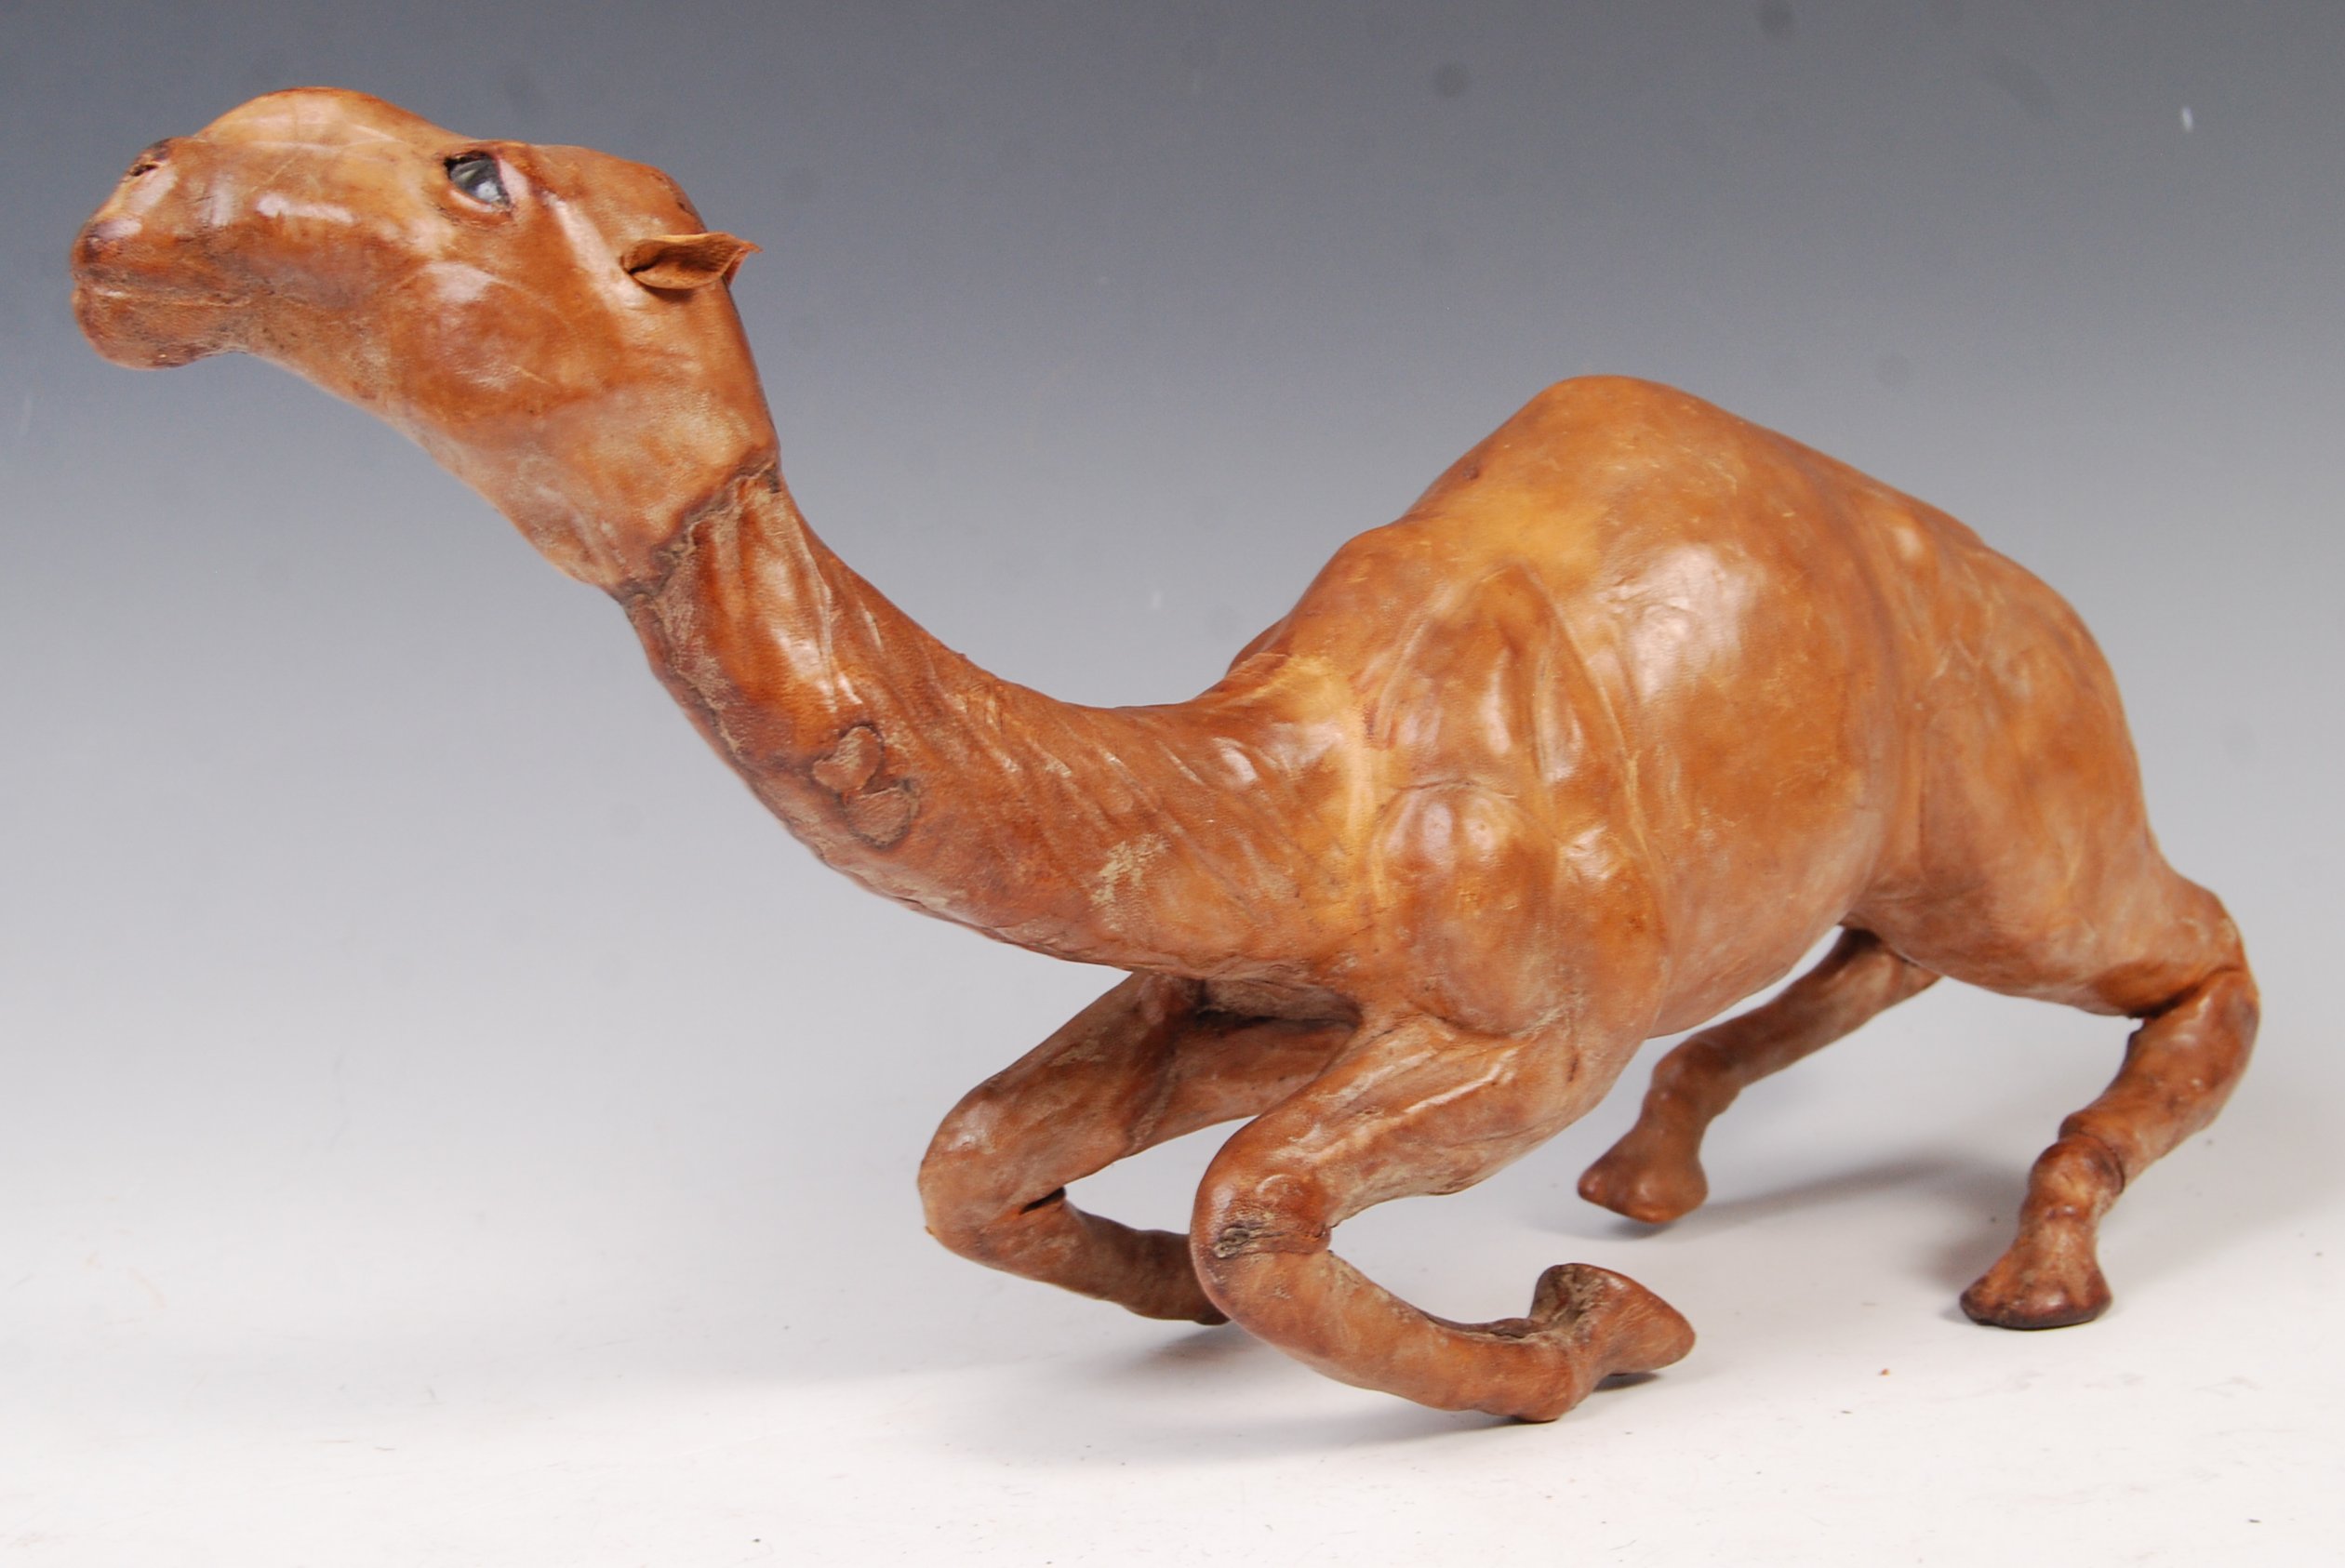 20TH CENTURY RETRO VINTAGE LEATHER CLAD MODEL OF A CAMEL.